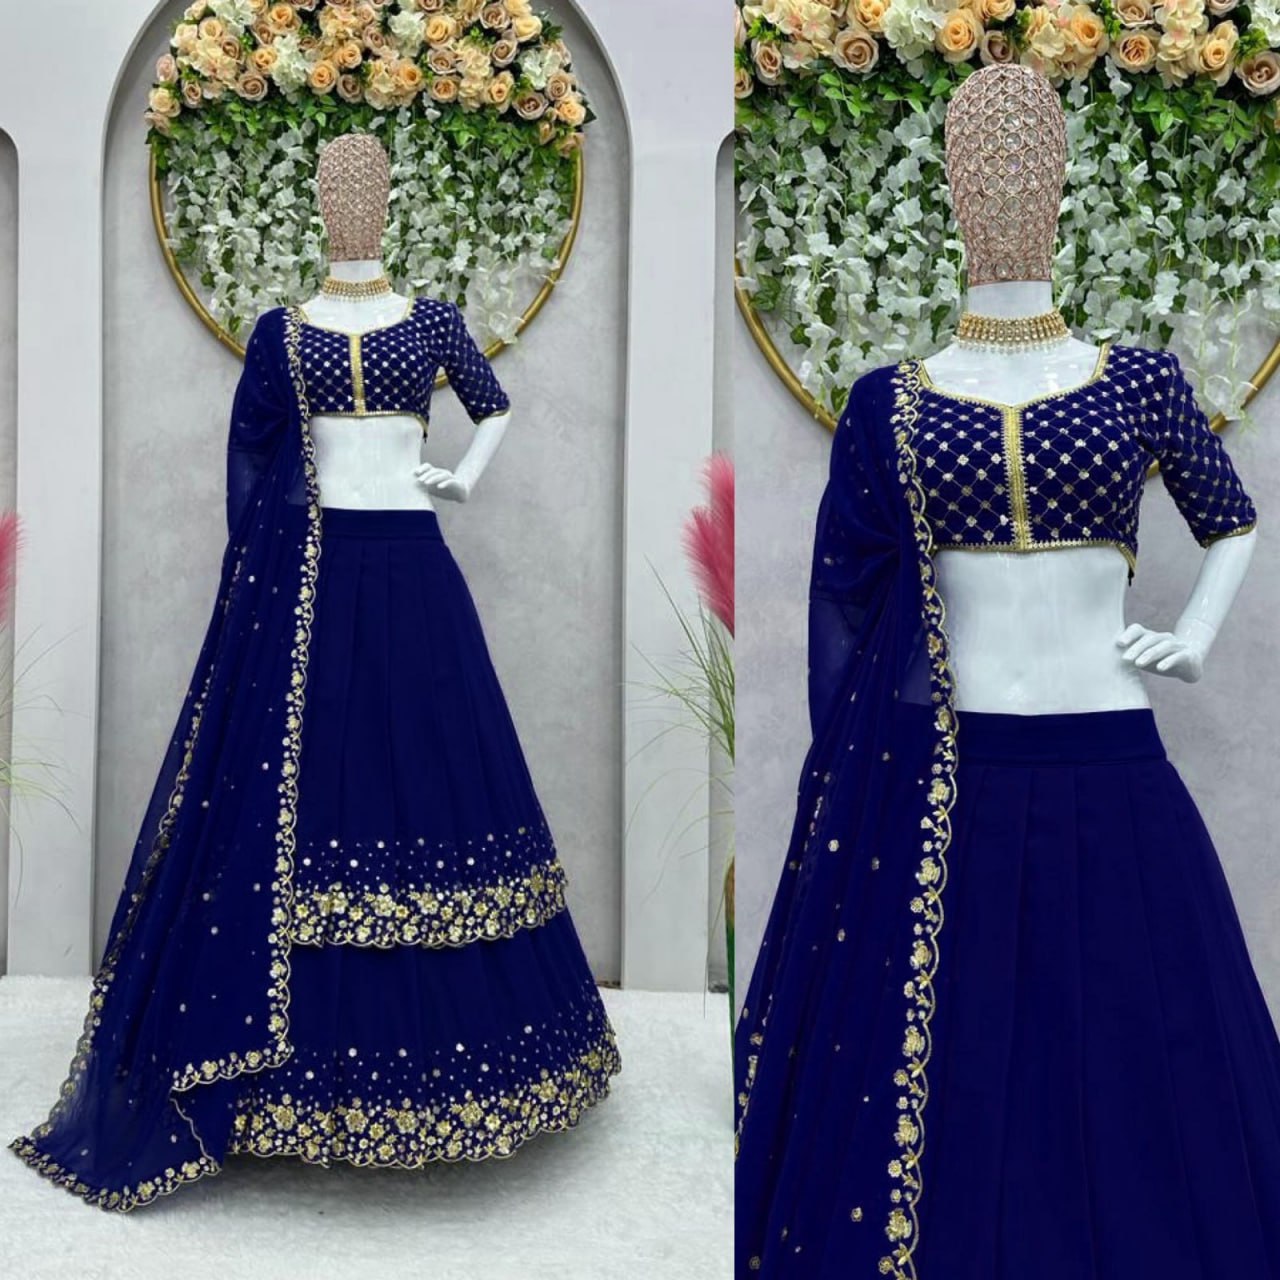 Wedding Wear Double Layer Georgette Lehngha Choli With Duppata For Girls Wear